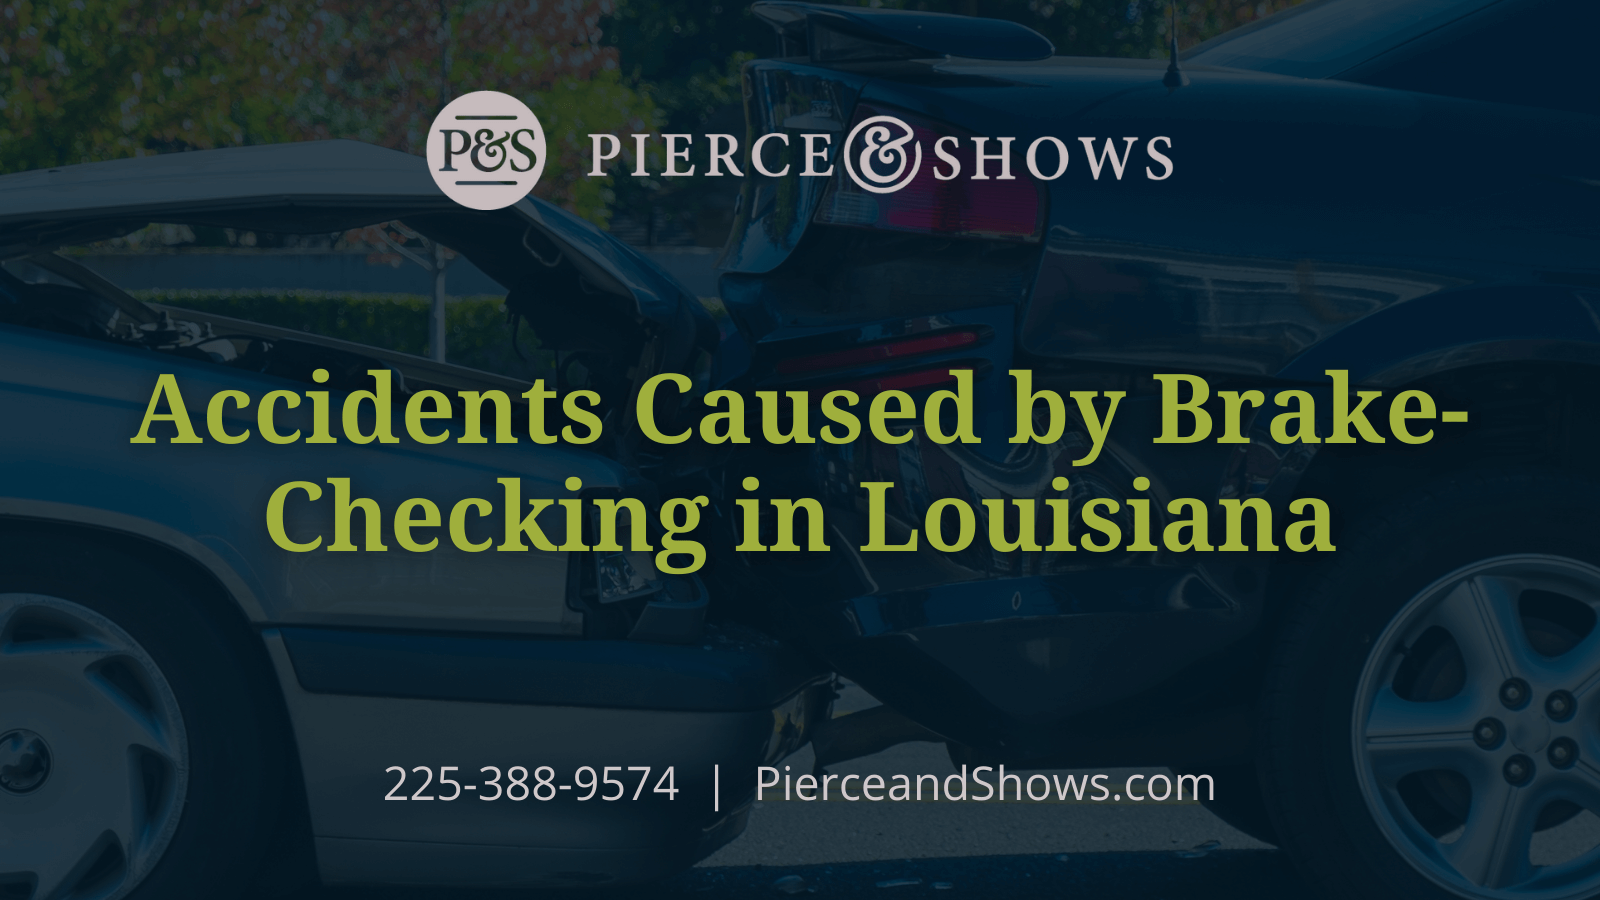 Accidents Caused by Brake-Checking in Louisiana - Baton Rouge Louisiana injury attorney Pierce & Shows